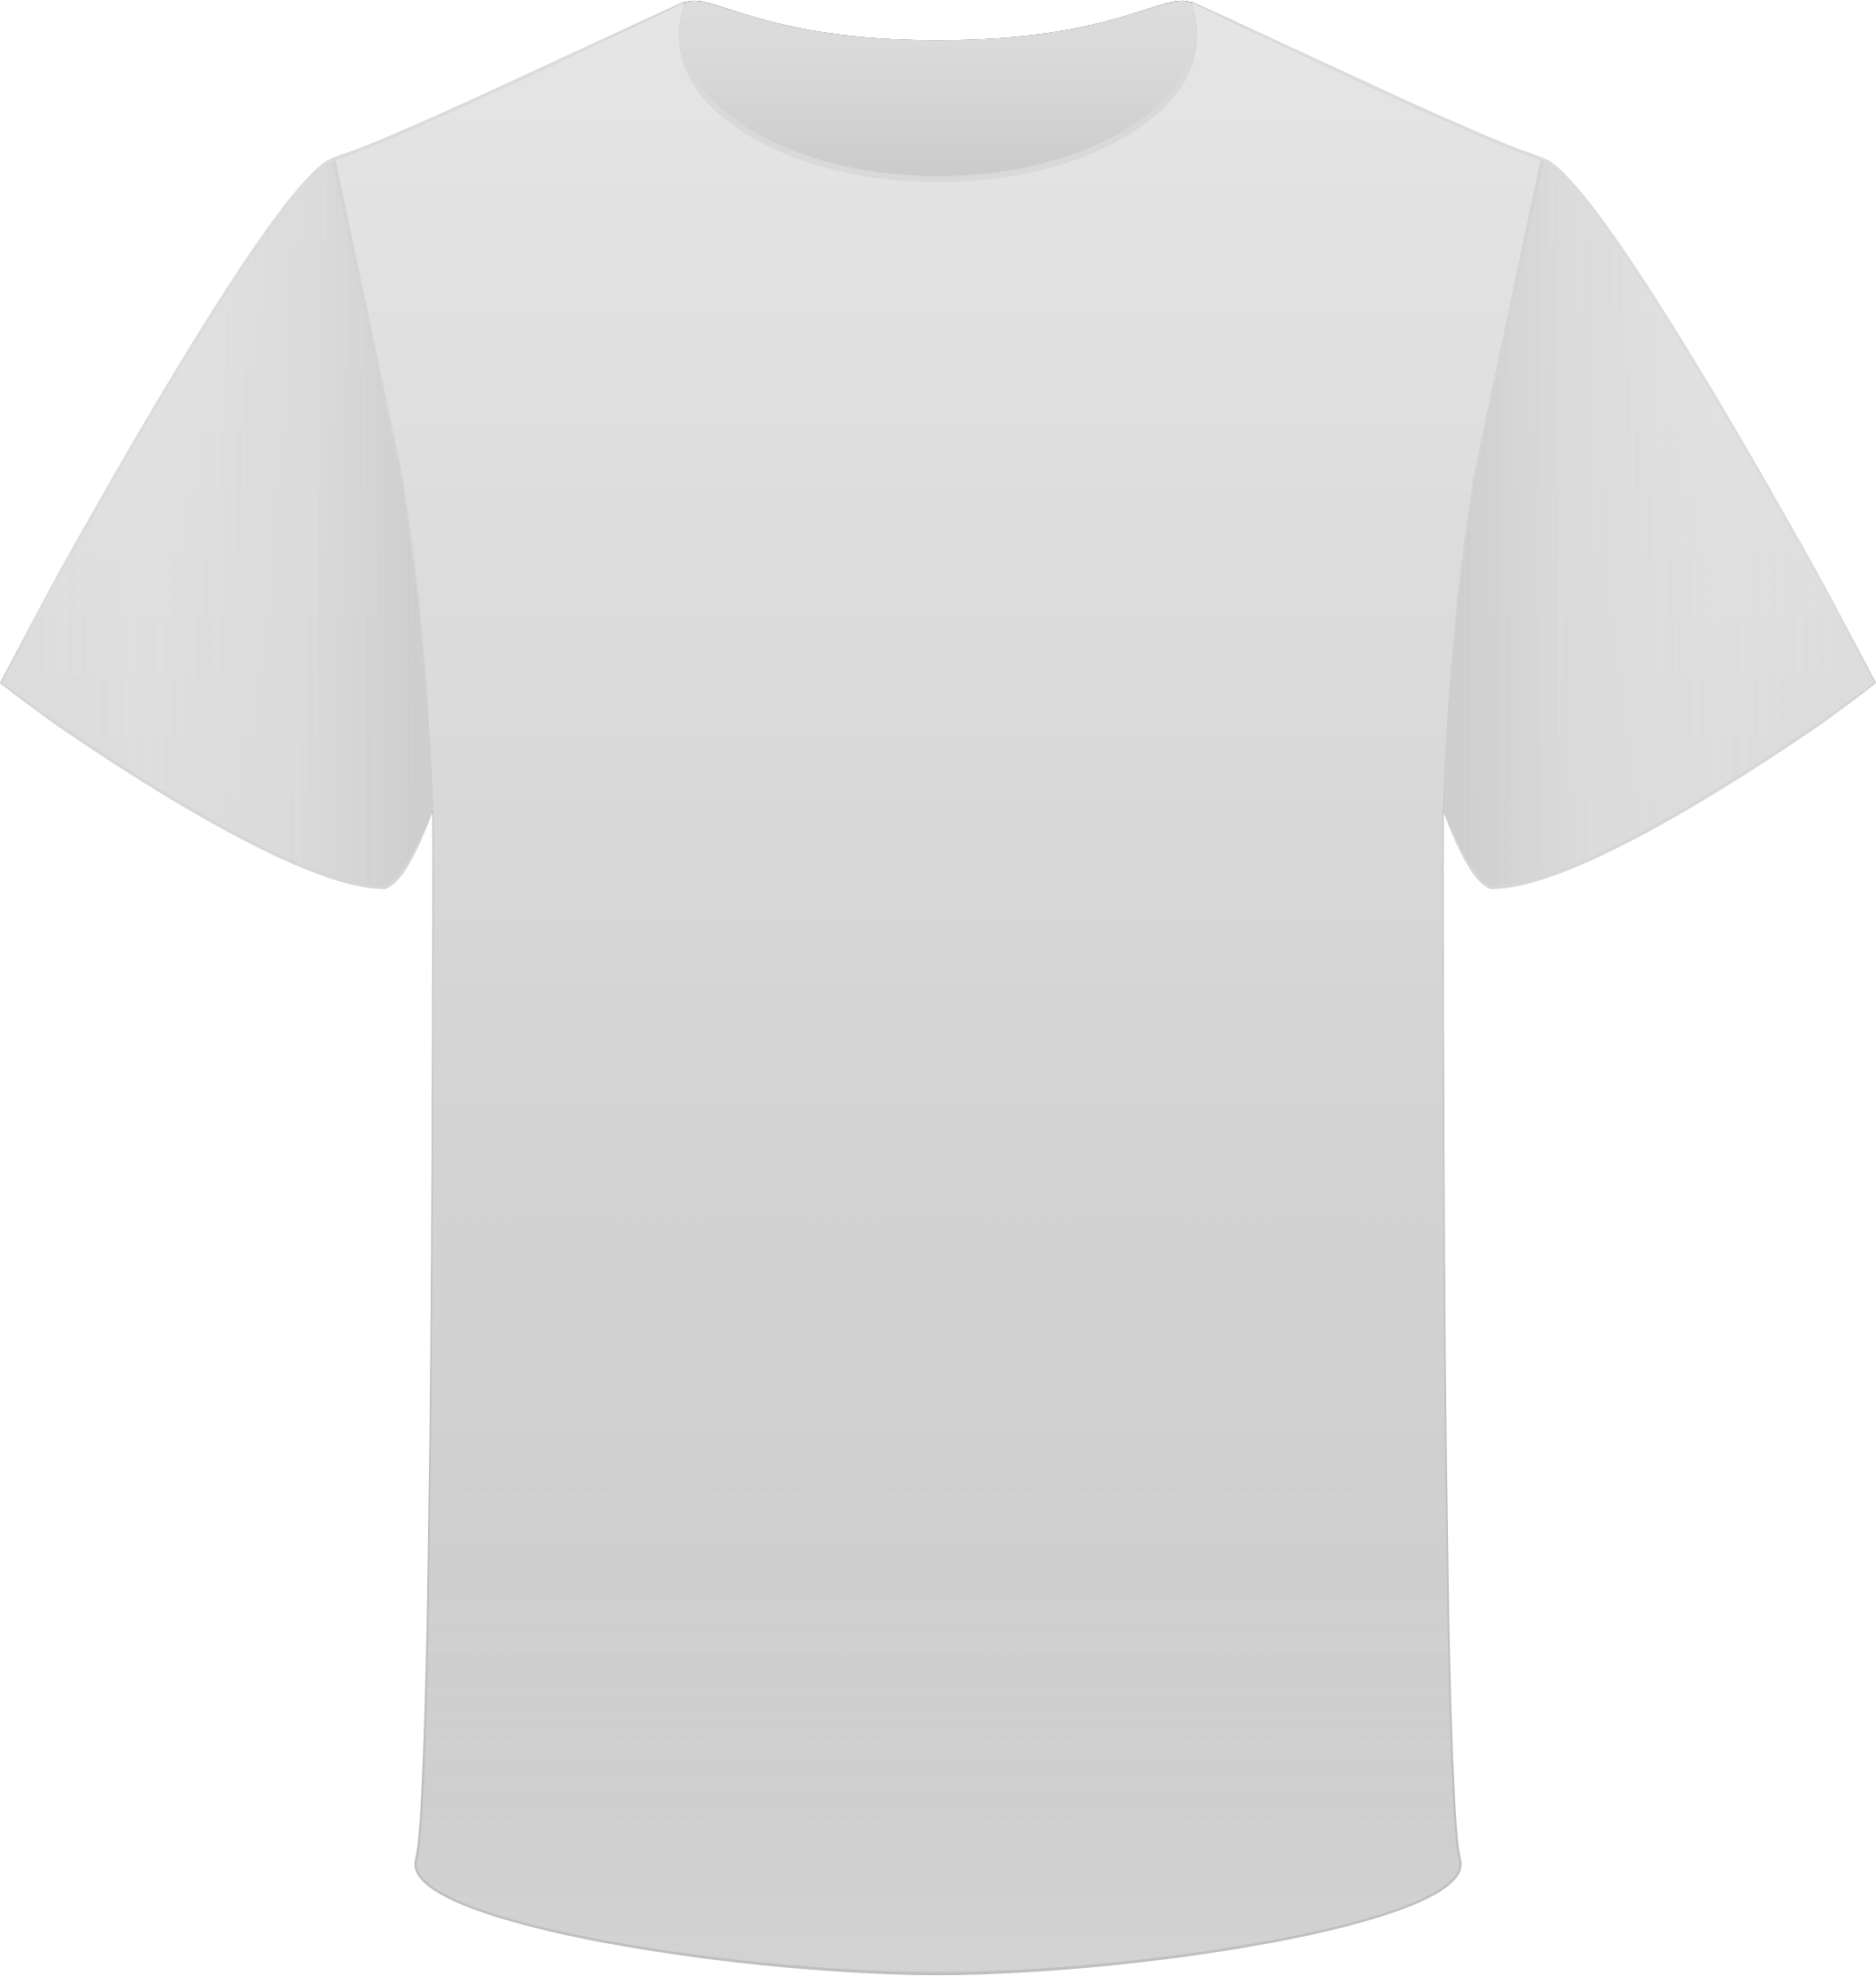 Tshirt White Clipart transparent PNG - StickPNG